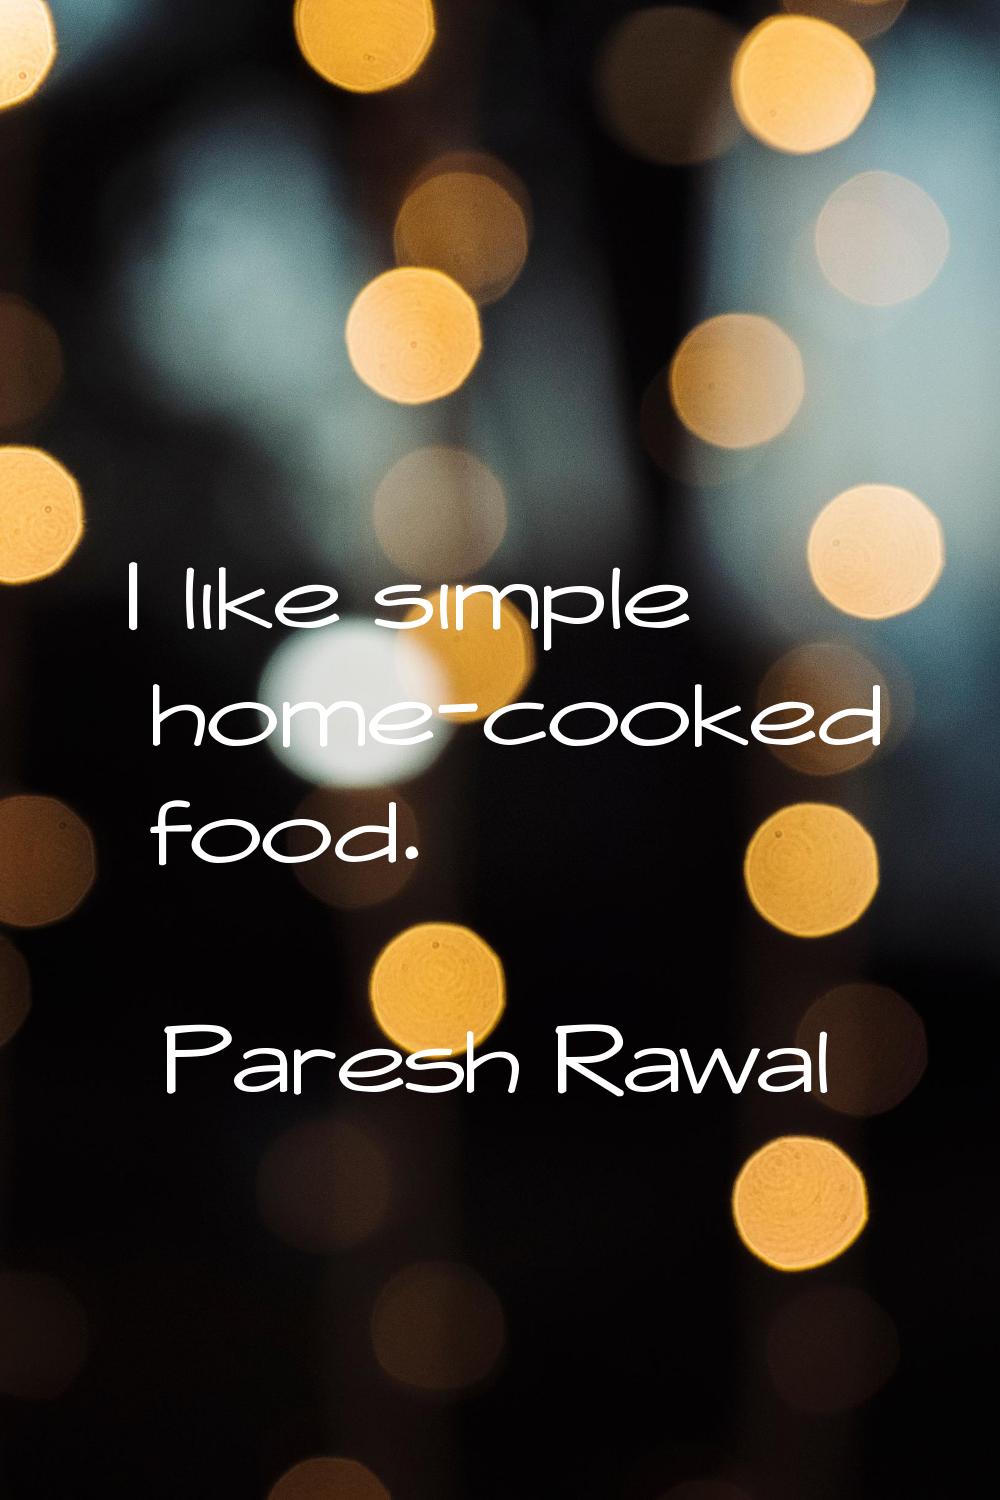 I like simple home-cooked food.